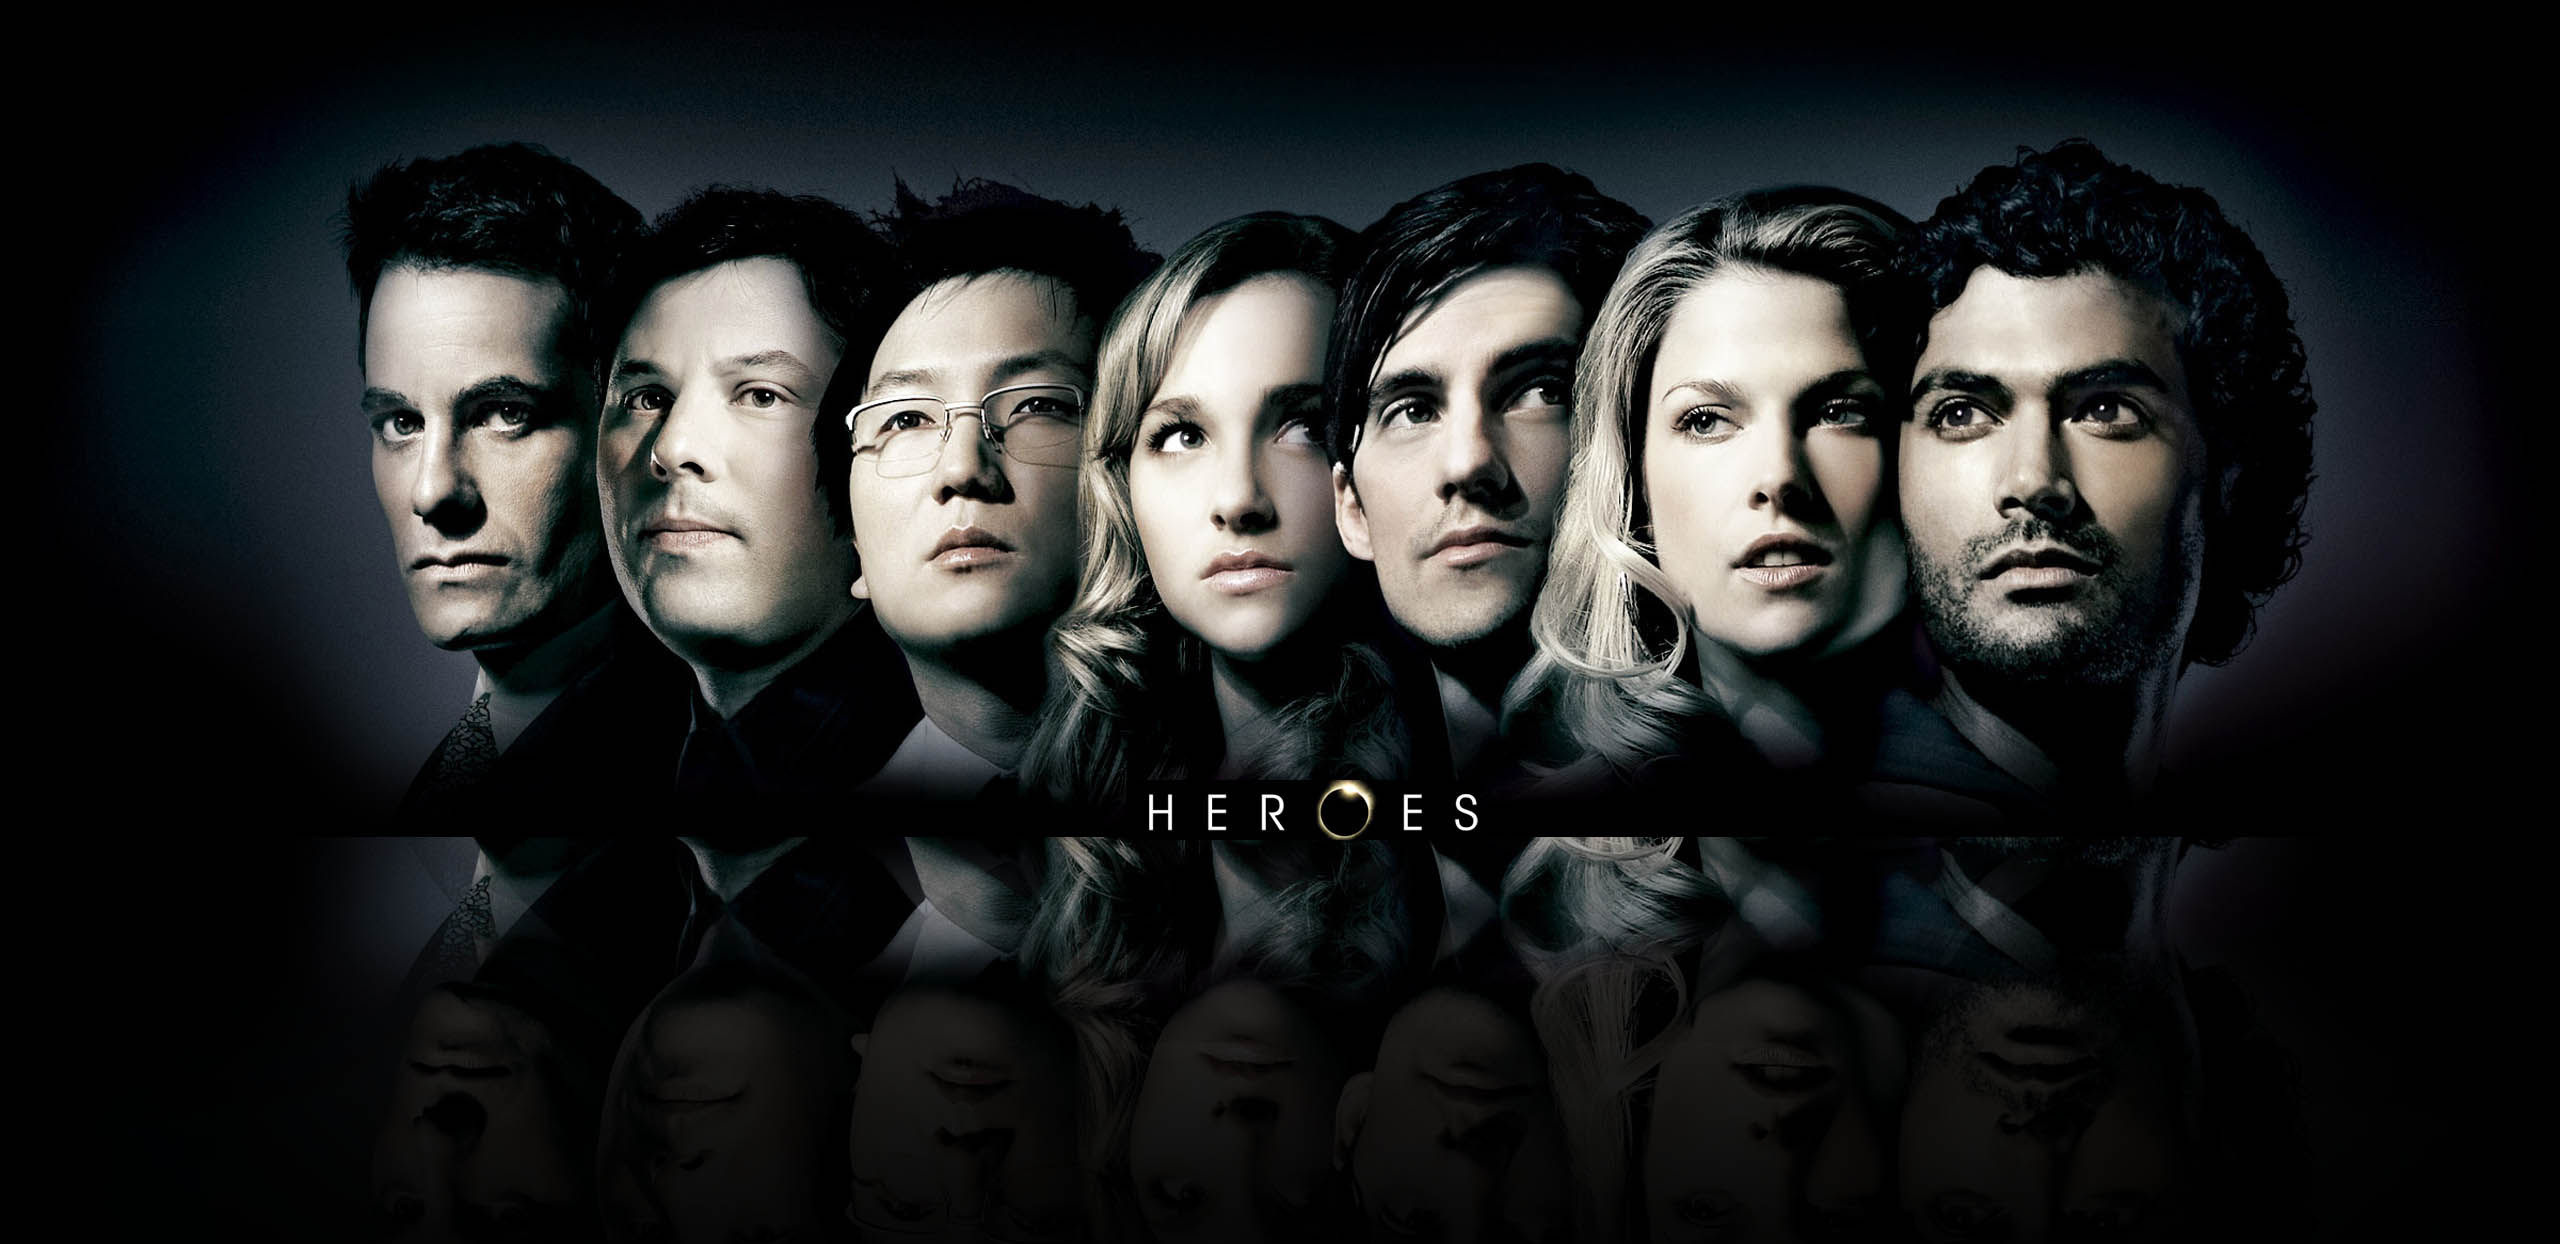 Heroes TV Series, Latest HD wallpapers, Action-packed TV shows, Exciting heroes, 2560x1250 Dual Screen Desktop